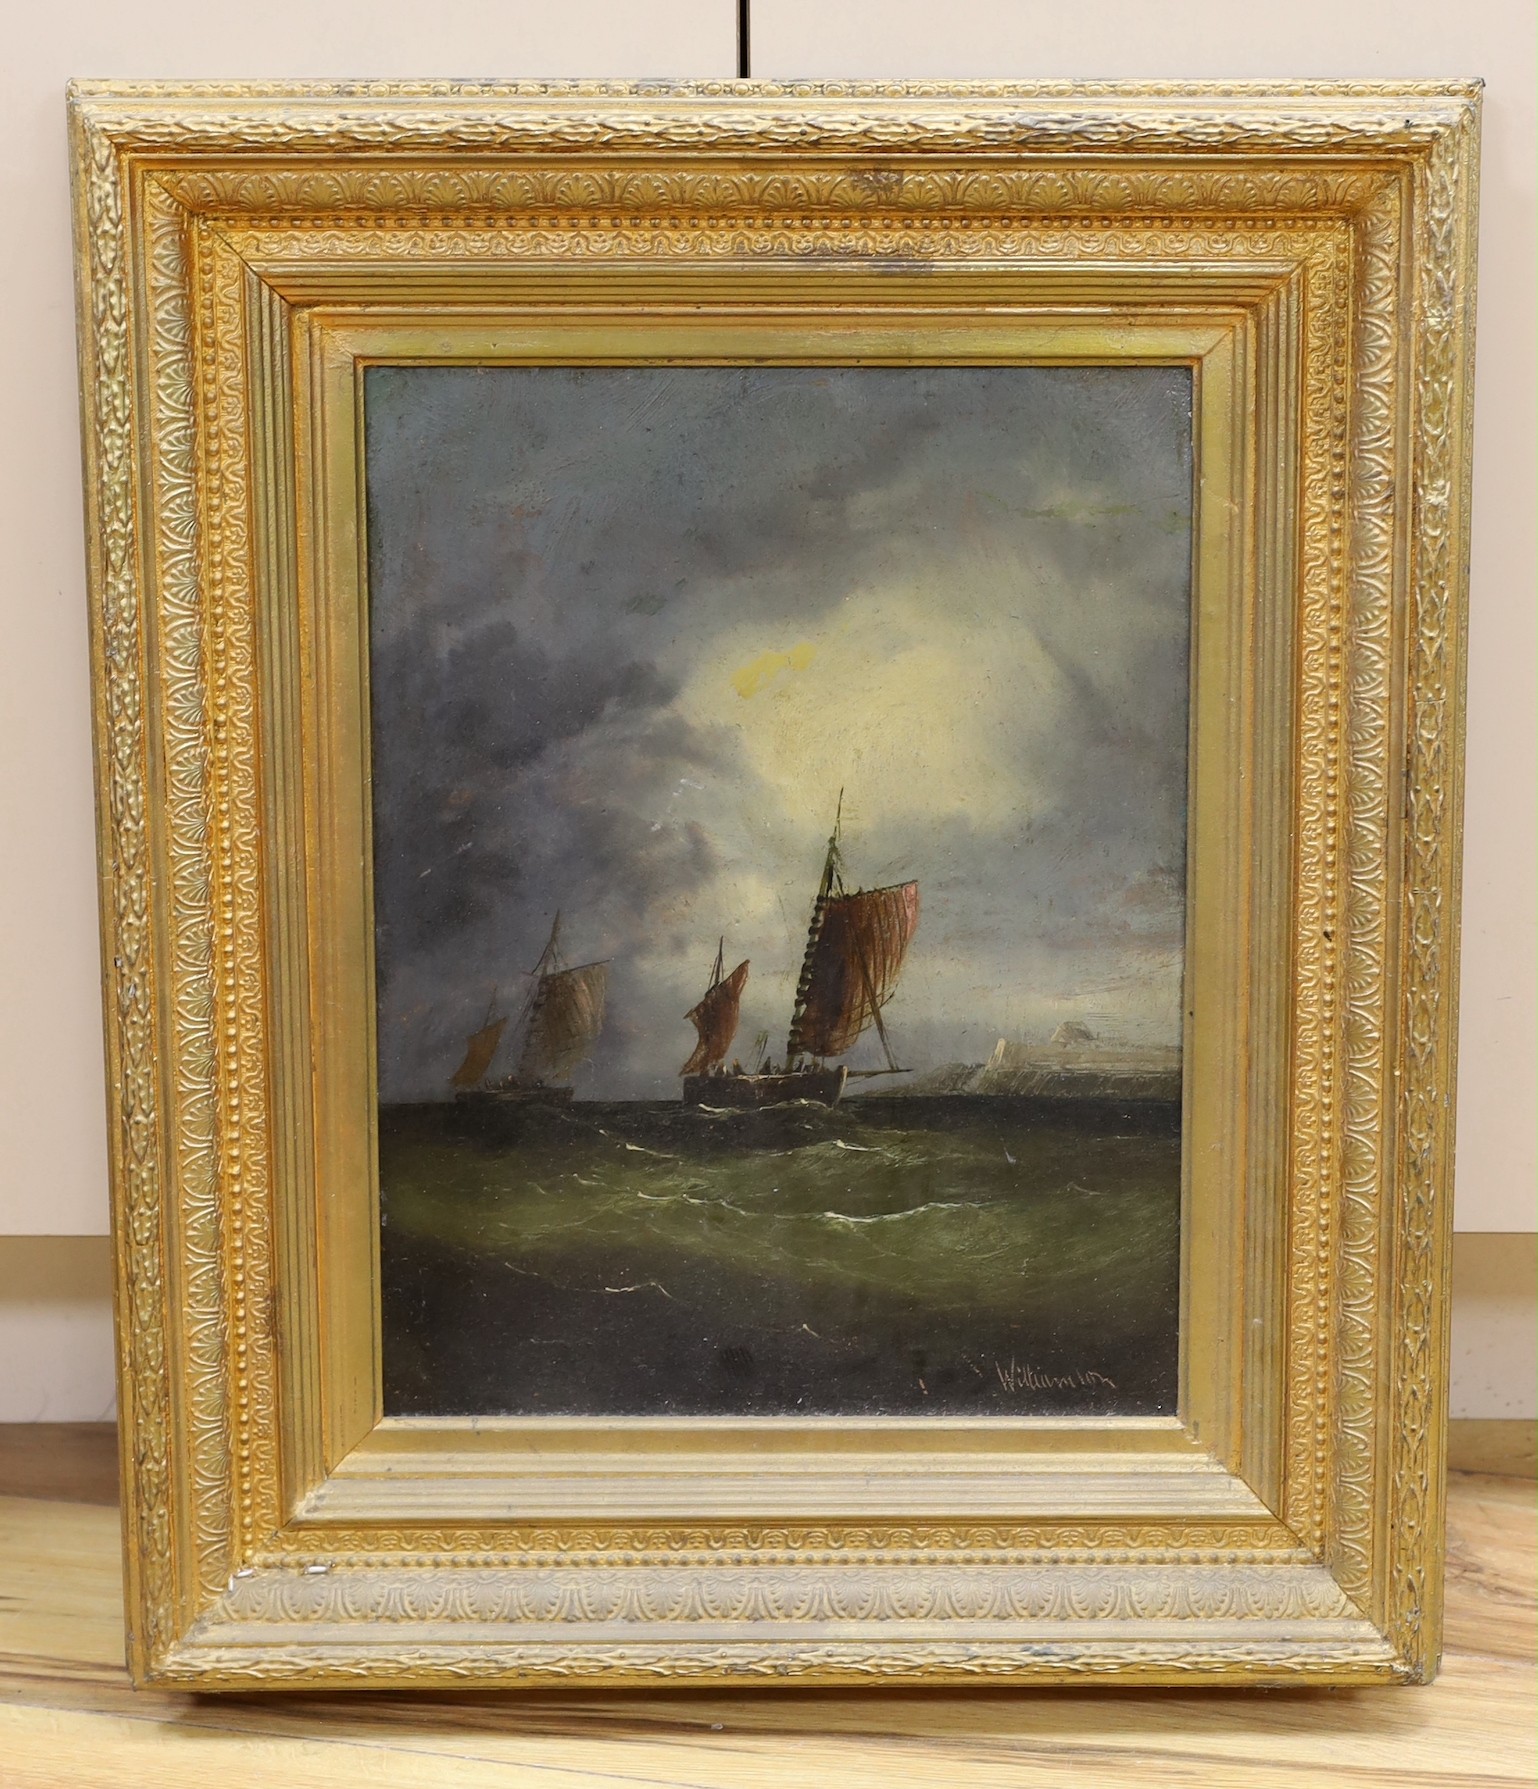 Williamson, oil on board, Fishing boats at sea, signed, 44 x 34cm